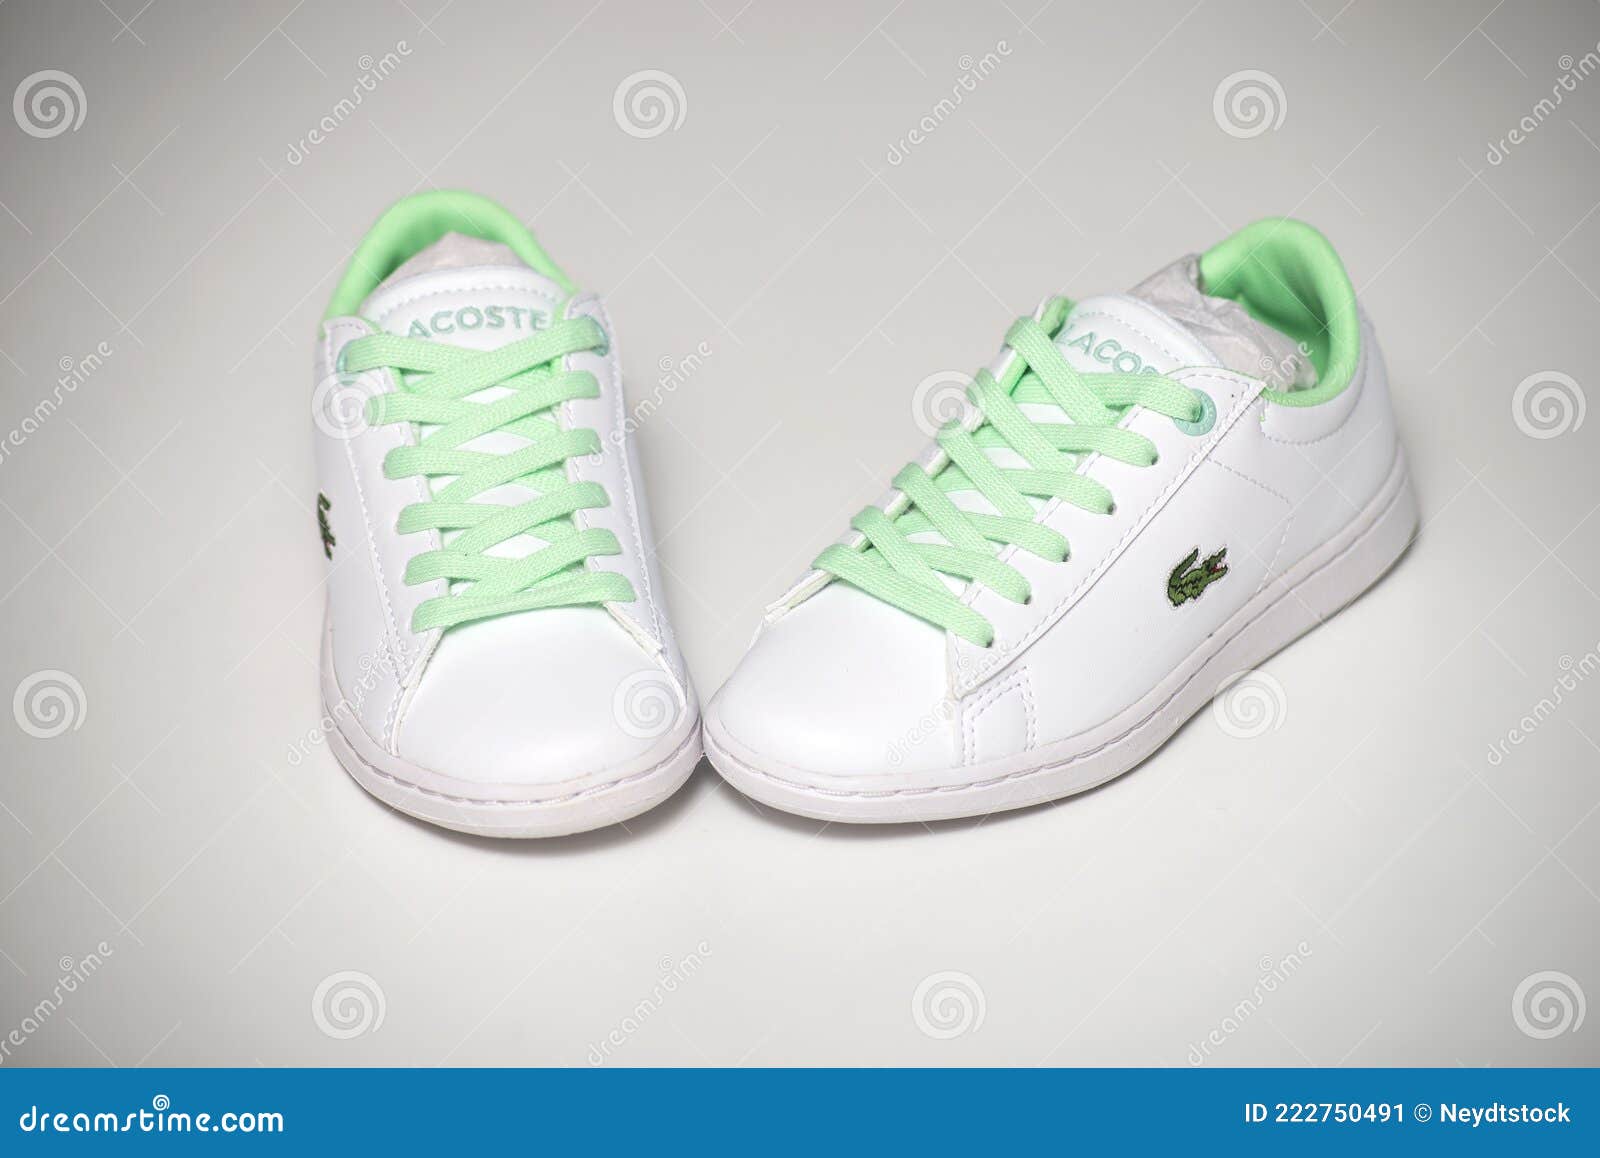 White Sneakers for by Lacoste on White Background, Lacoste is the Famous French Luxury Brand of Sportwear in the World Editorial Photo - Image of isolated, brand: 222750491